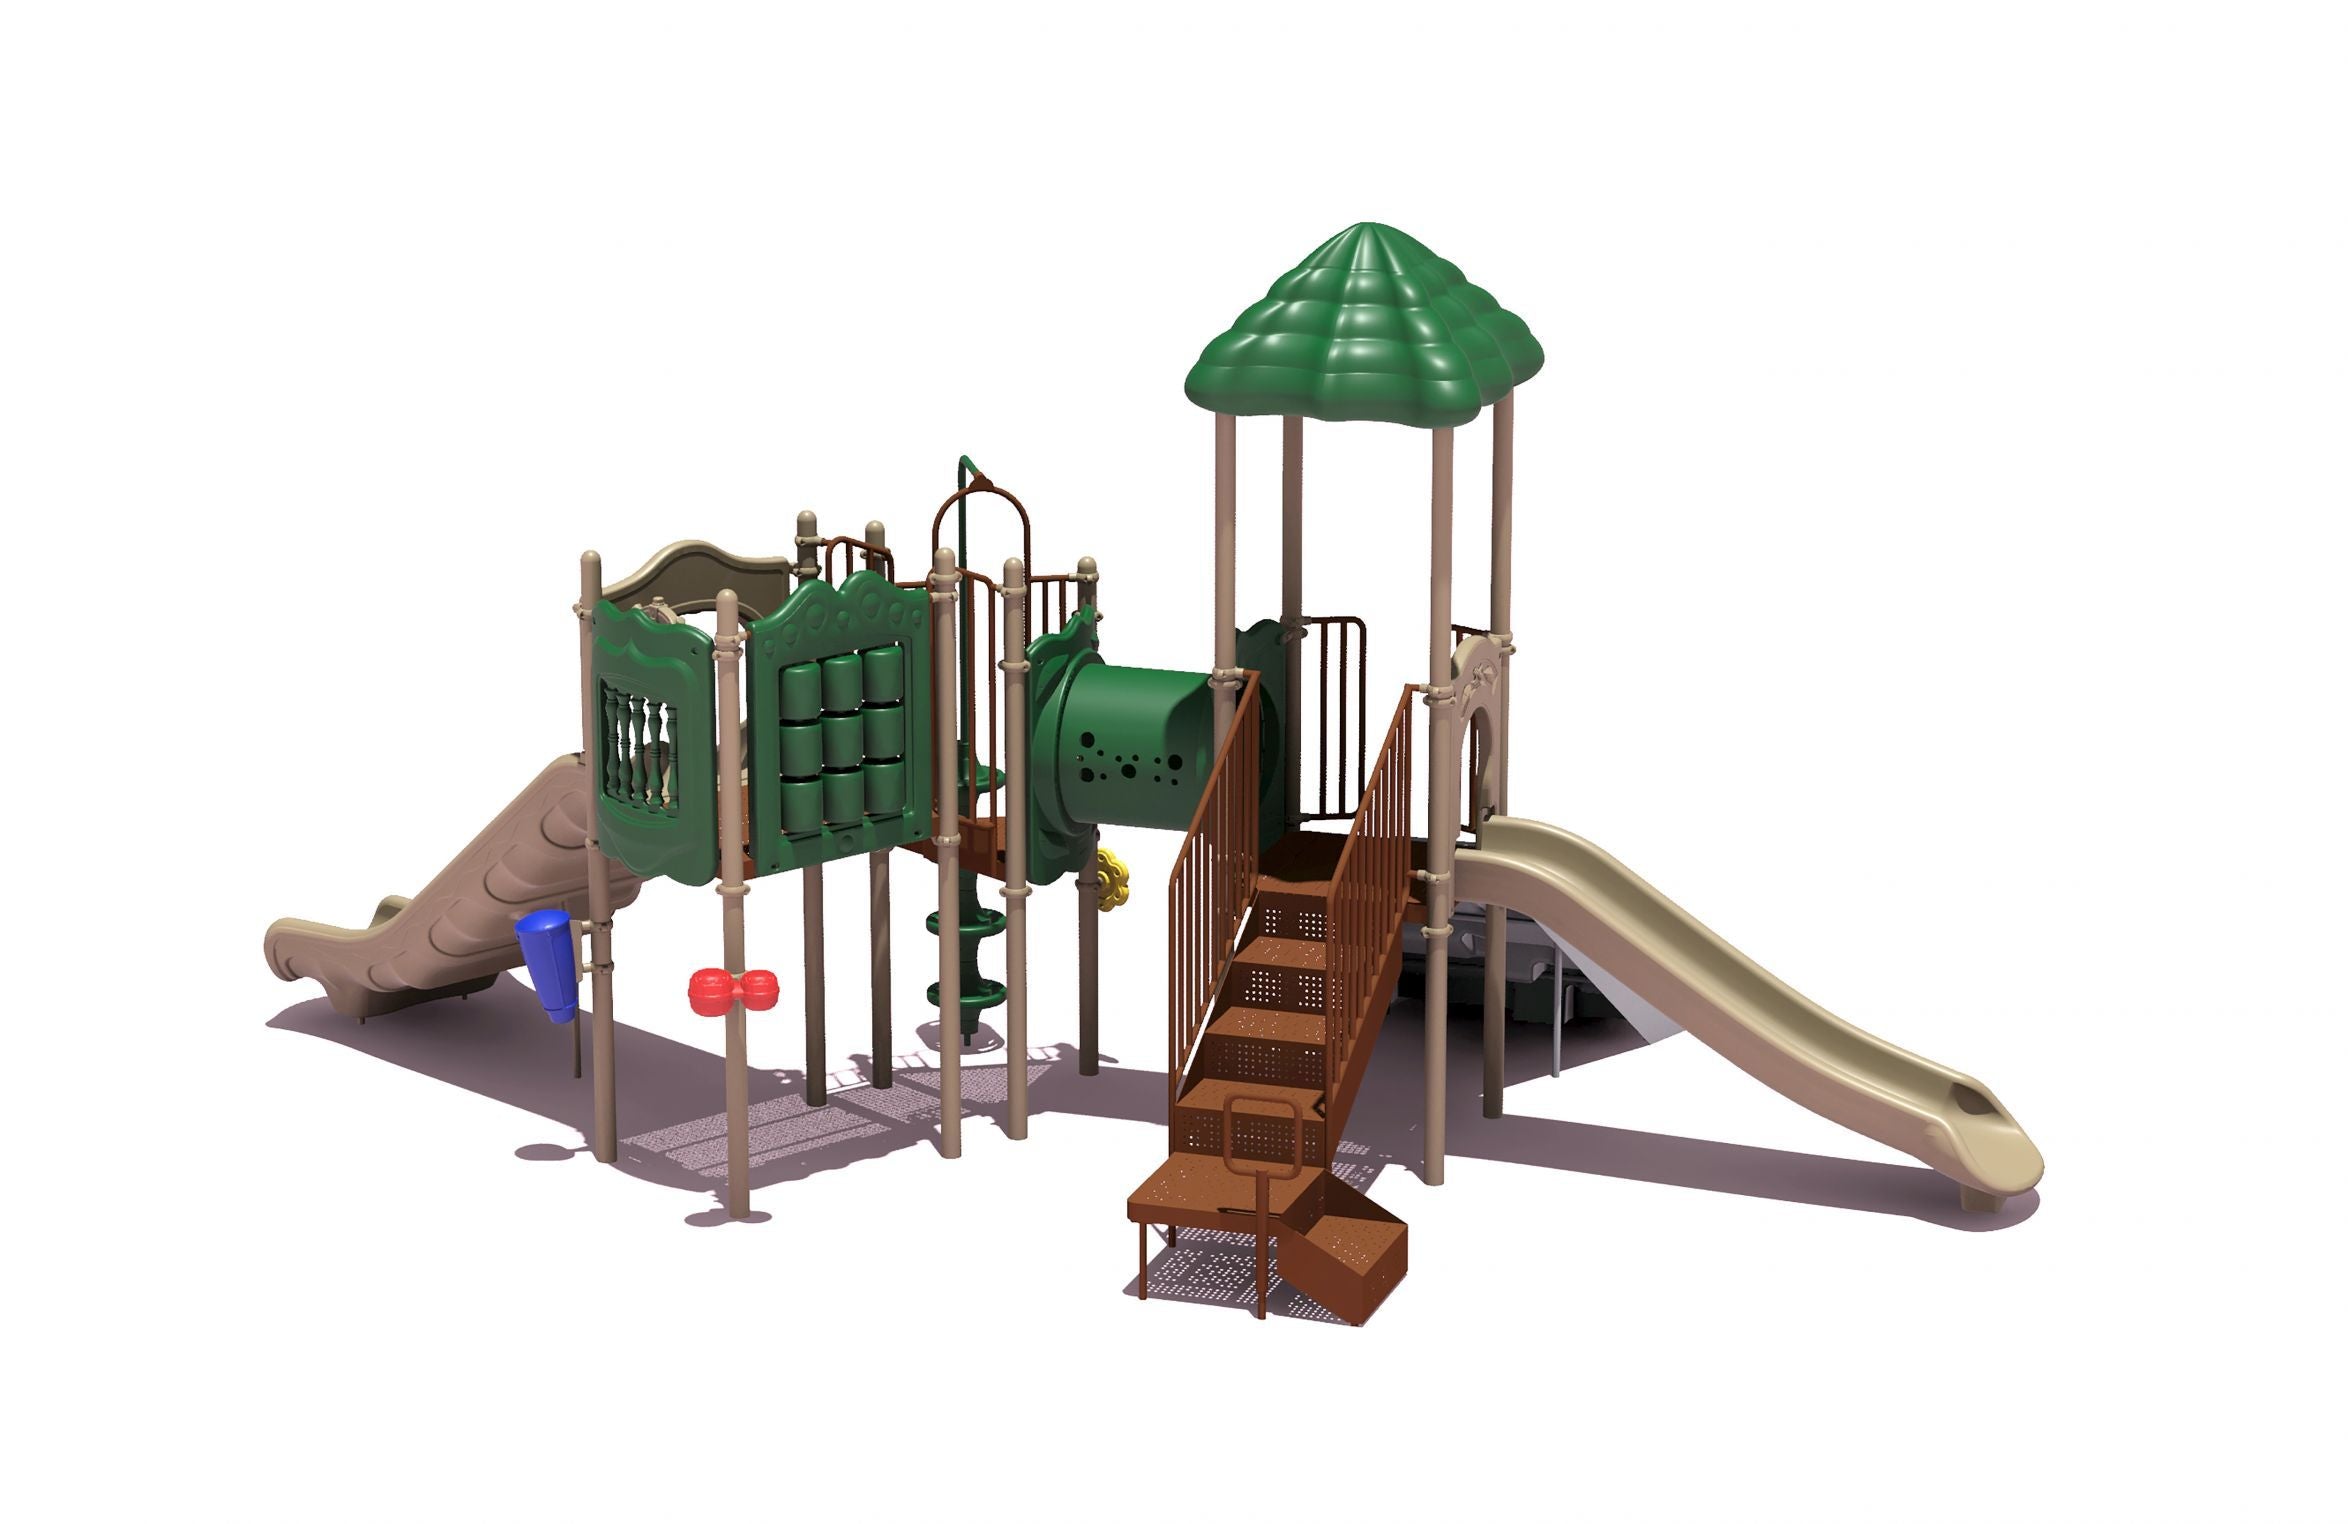 Falcons Roost Playsystem | WillyGoat Playground & Park Equipment